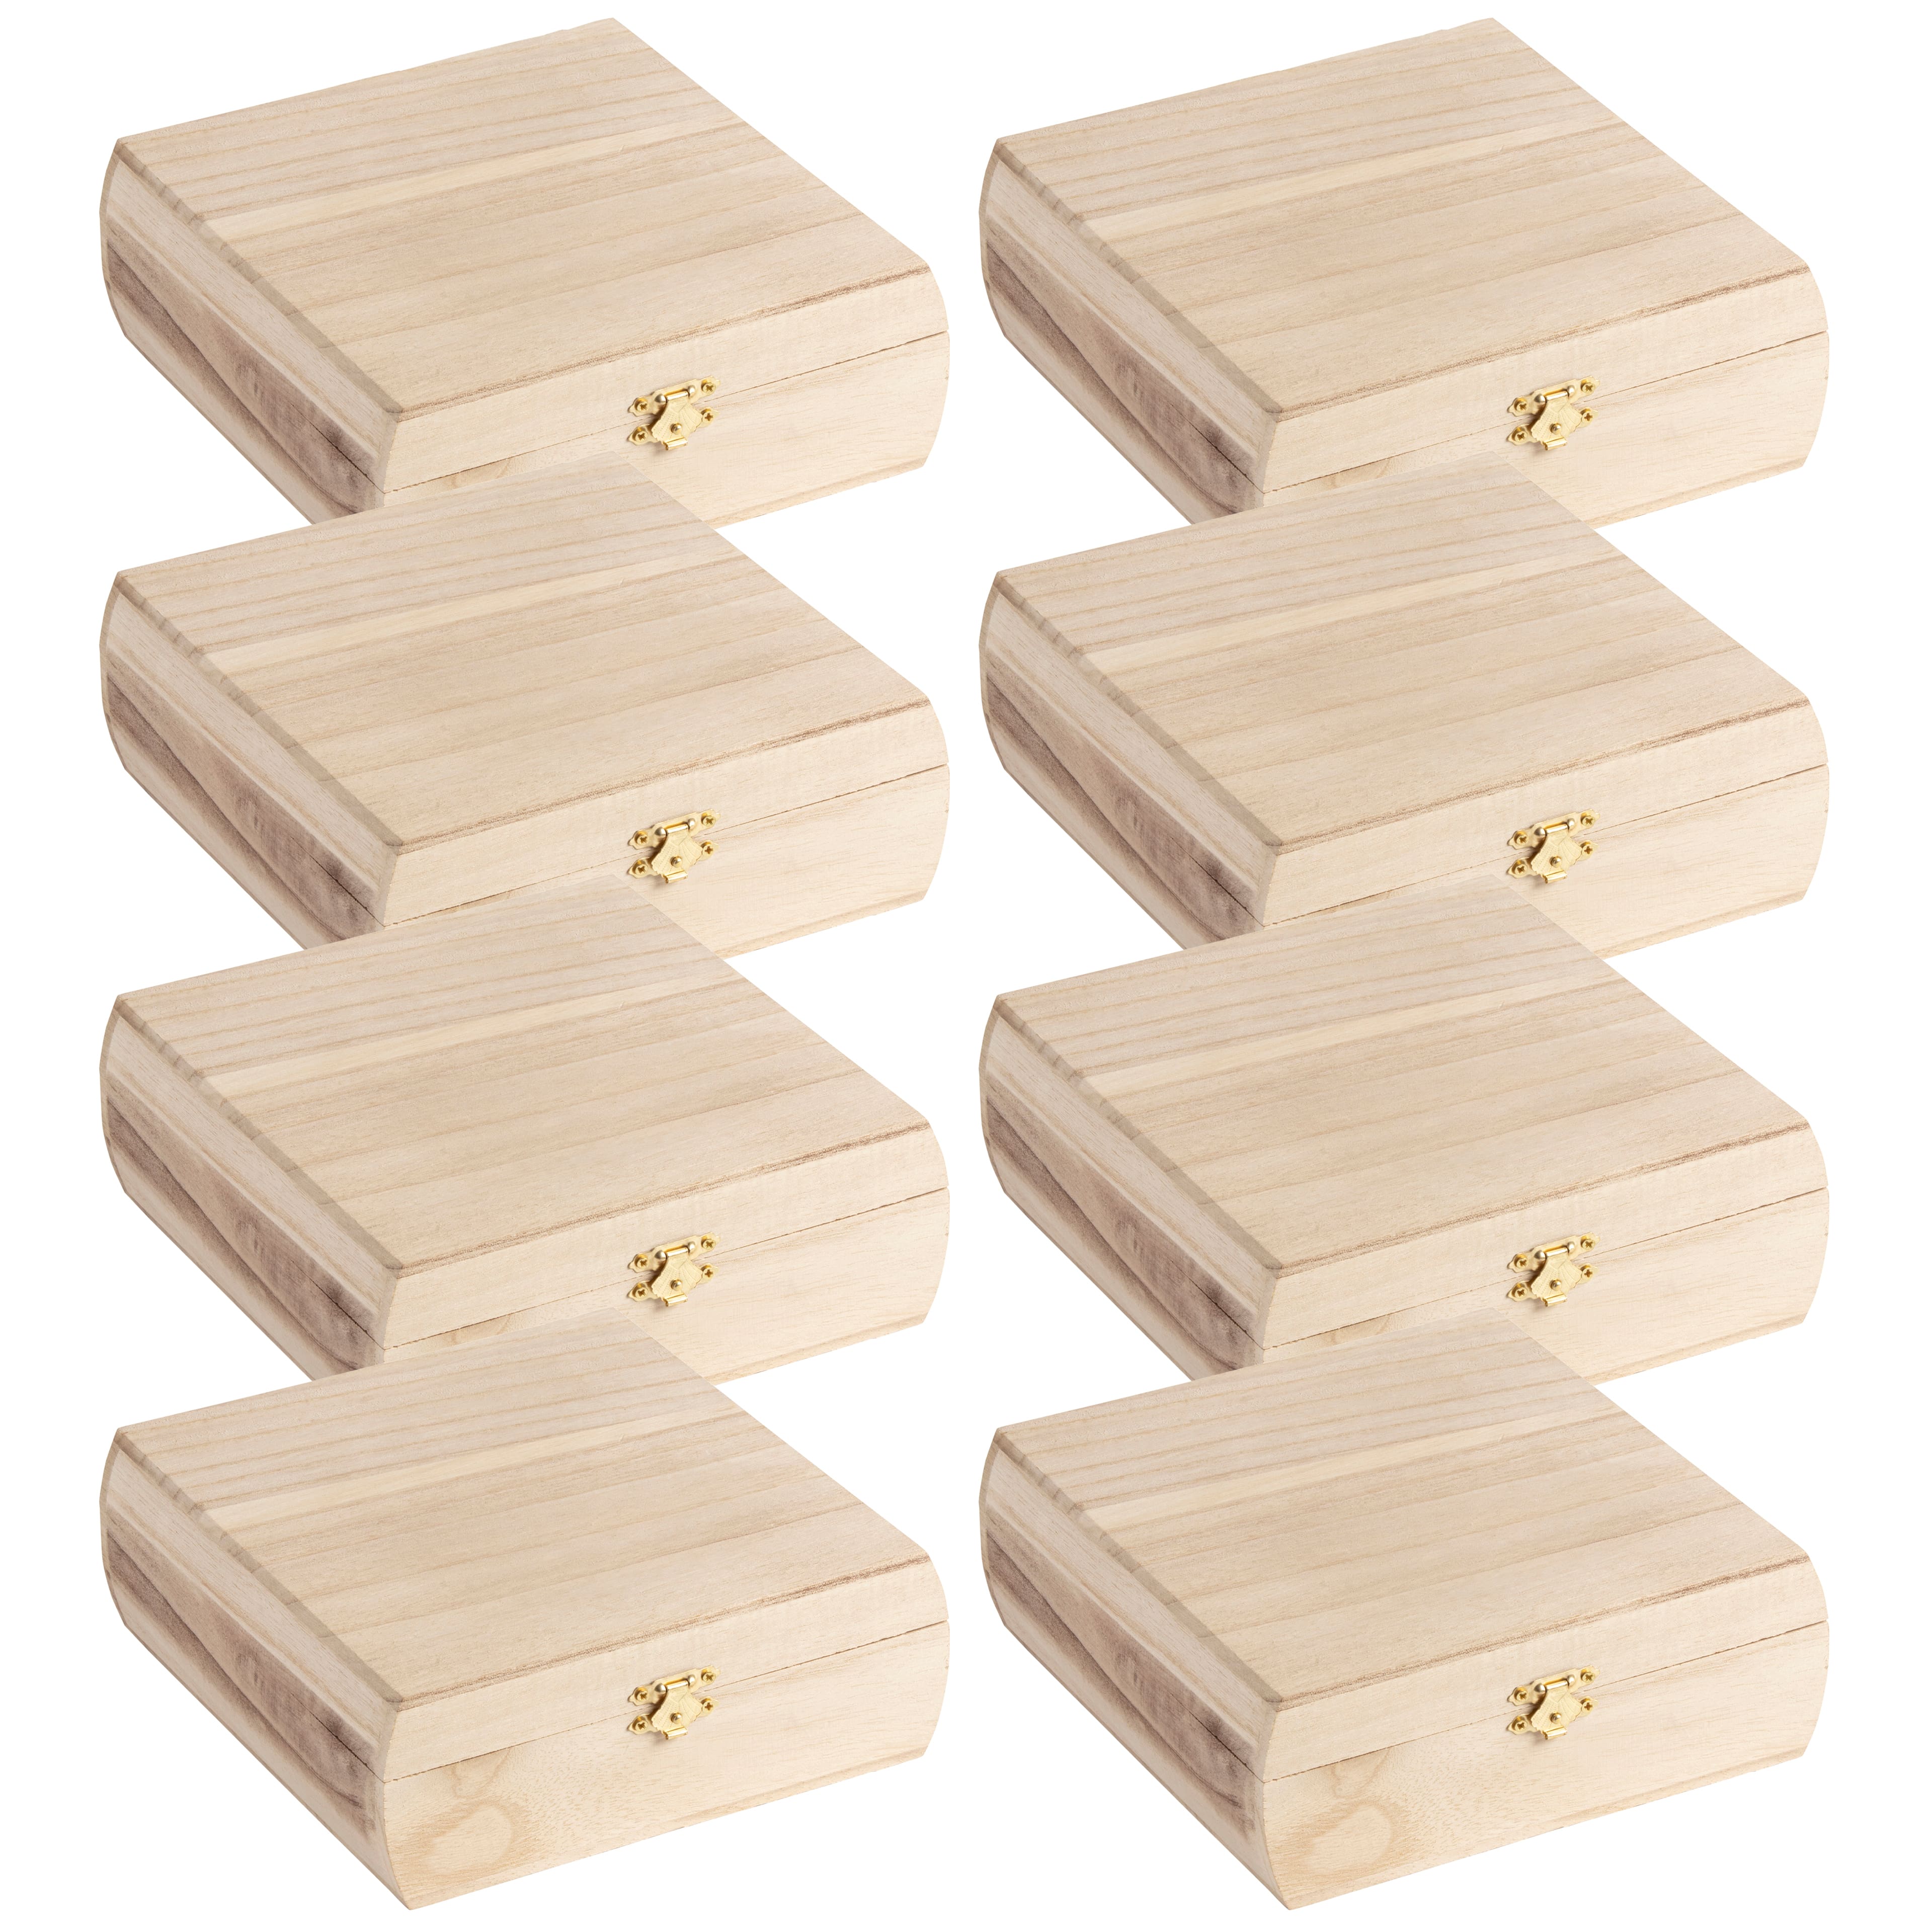 3 Pack Unfinished Wood Box, Small Wooden Boxes with Lids Stickers